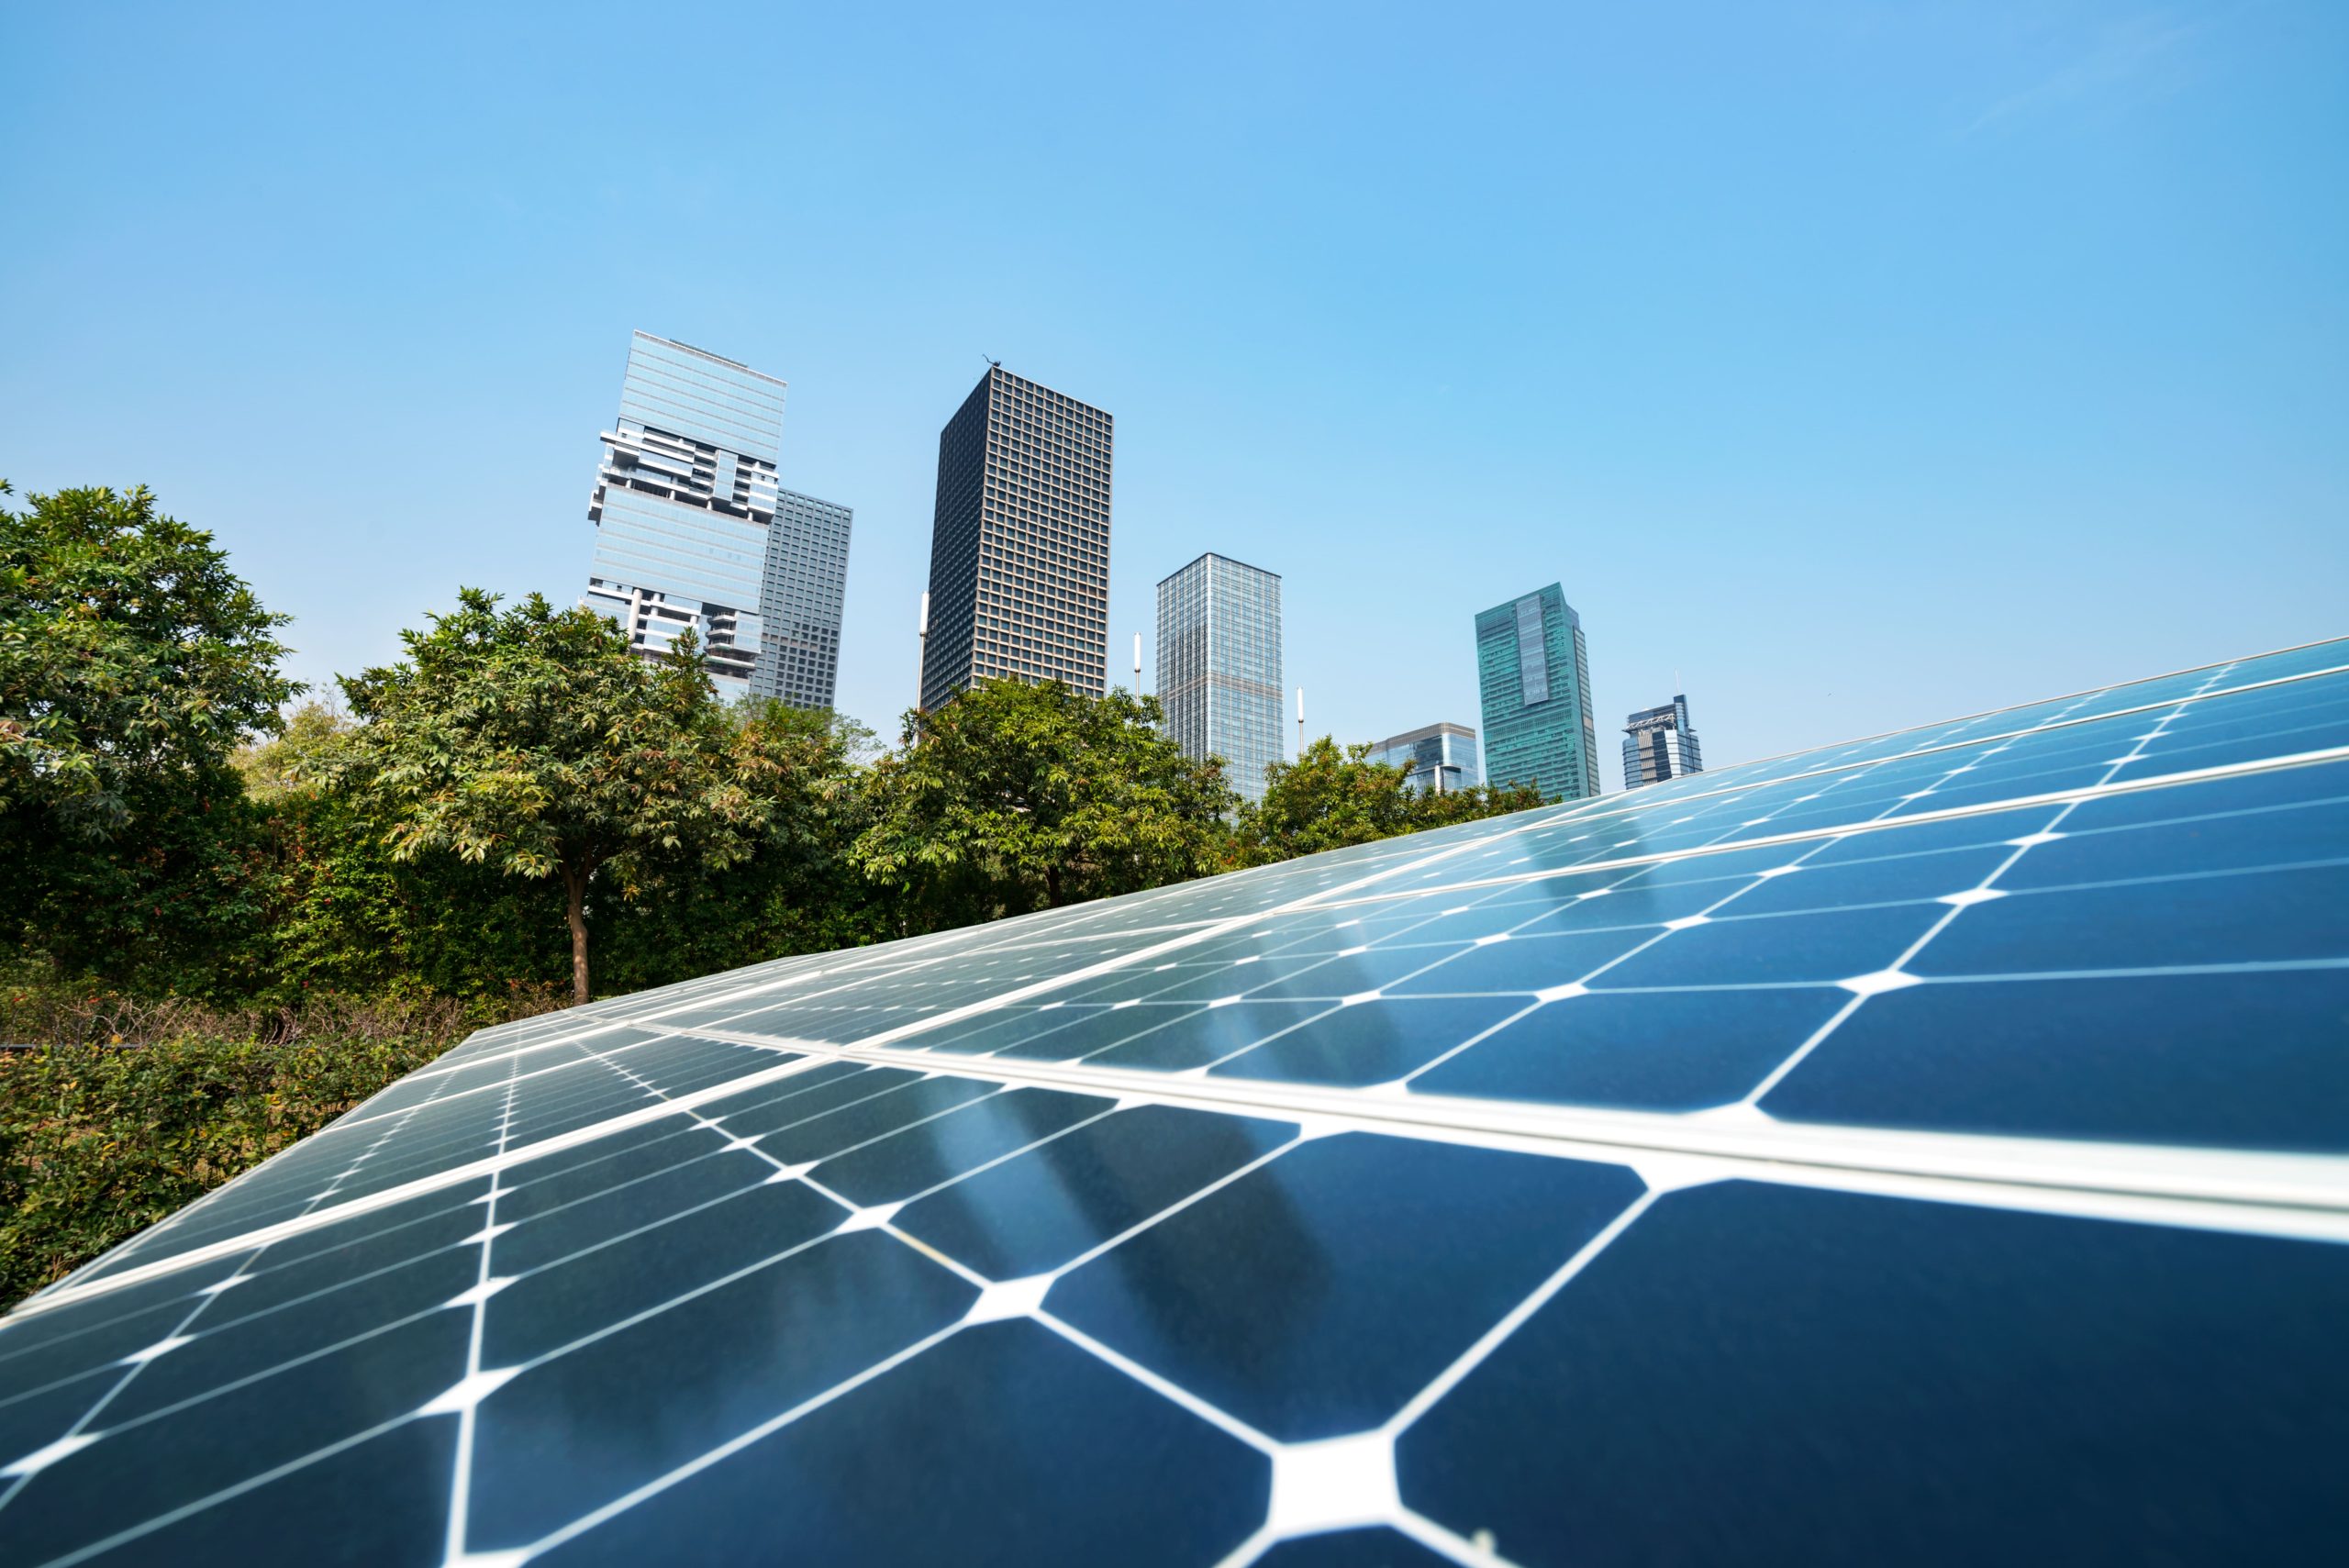 5 Reason Businesses Should Look into Going Solar